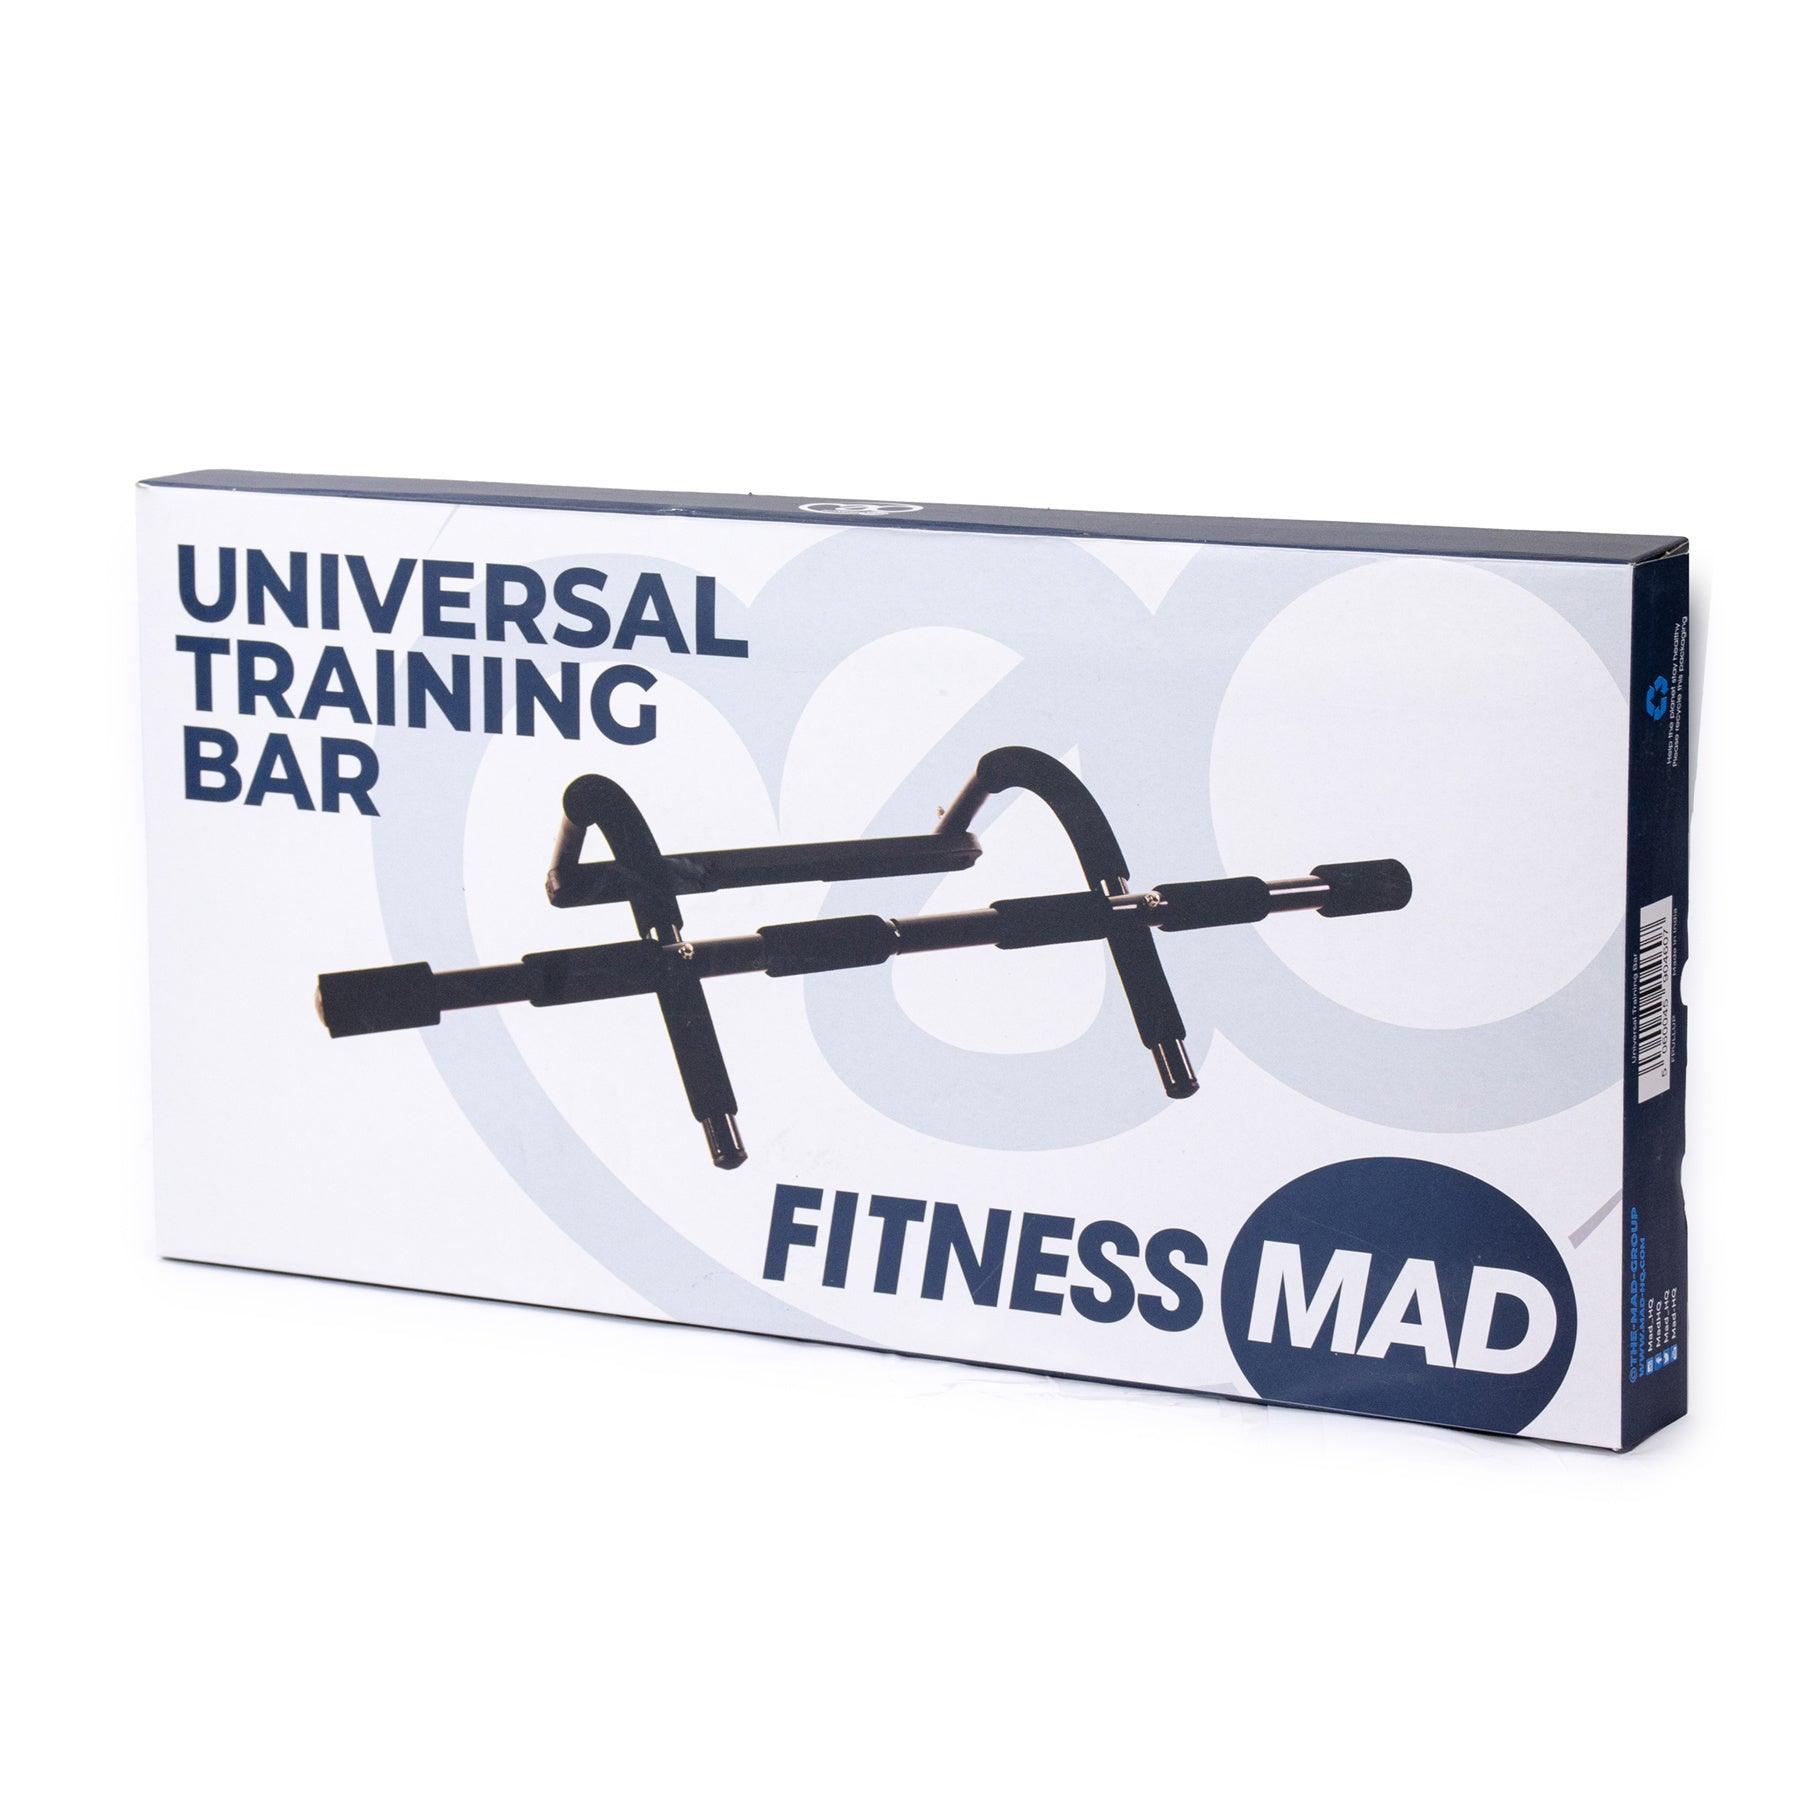 Strength Training Door Frame PULL-UP Bar - mad fitness fitness home workout image 5